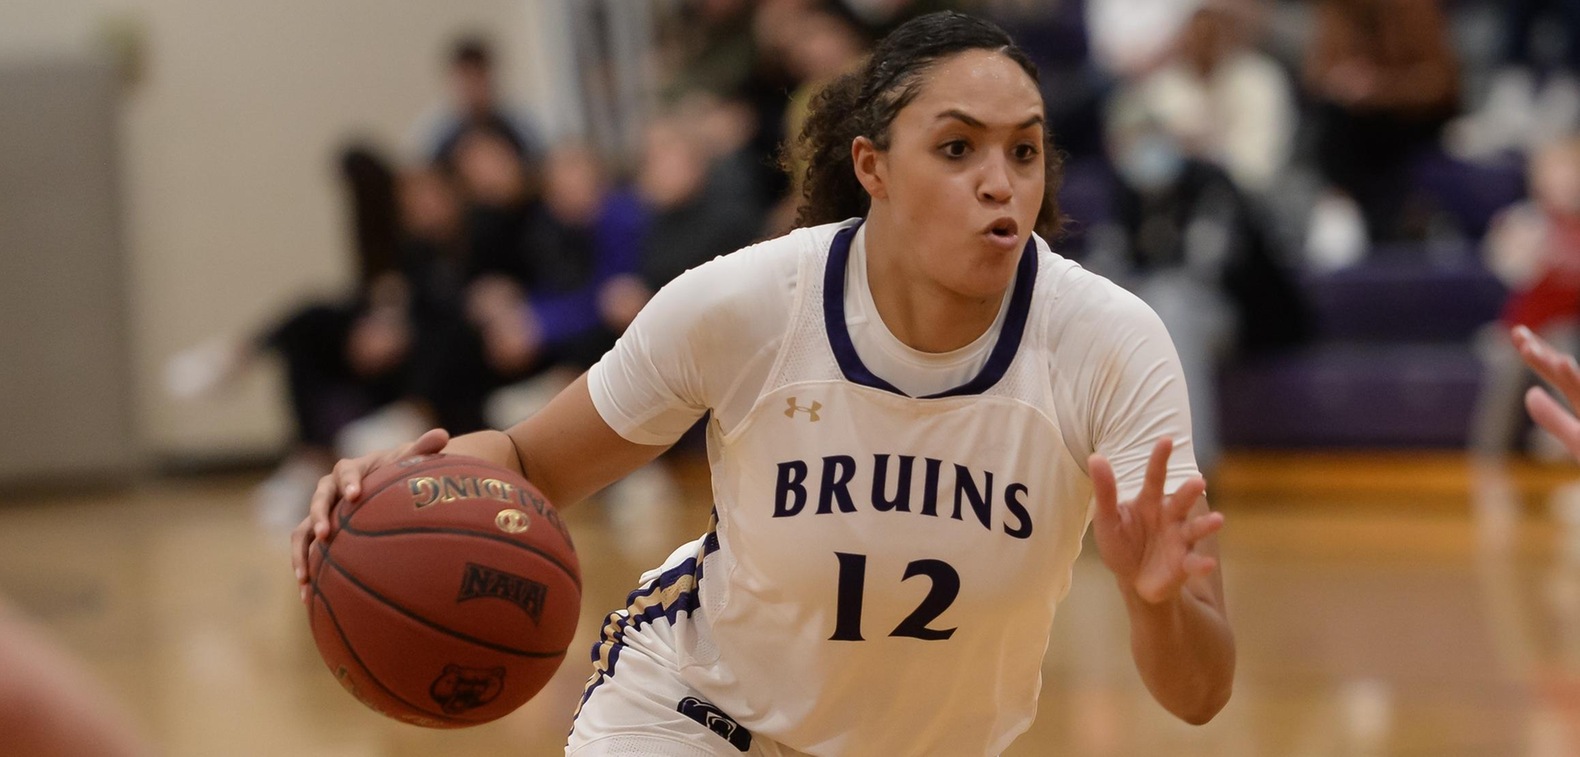 Elexis Martinez led the Bruins with 13 points and six rebounds.